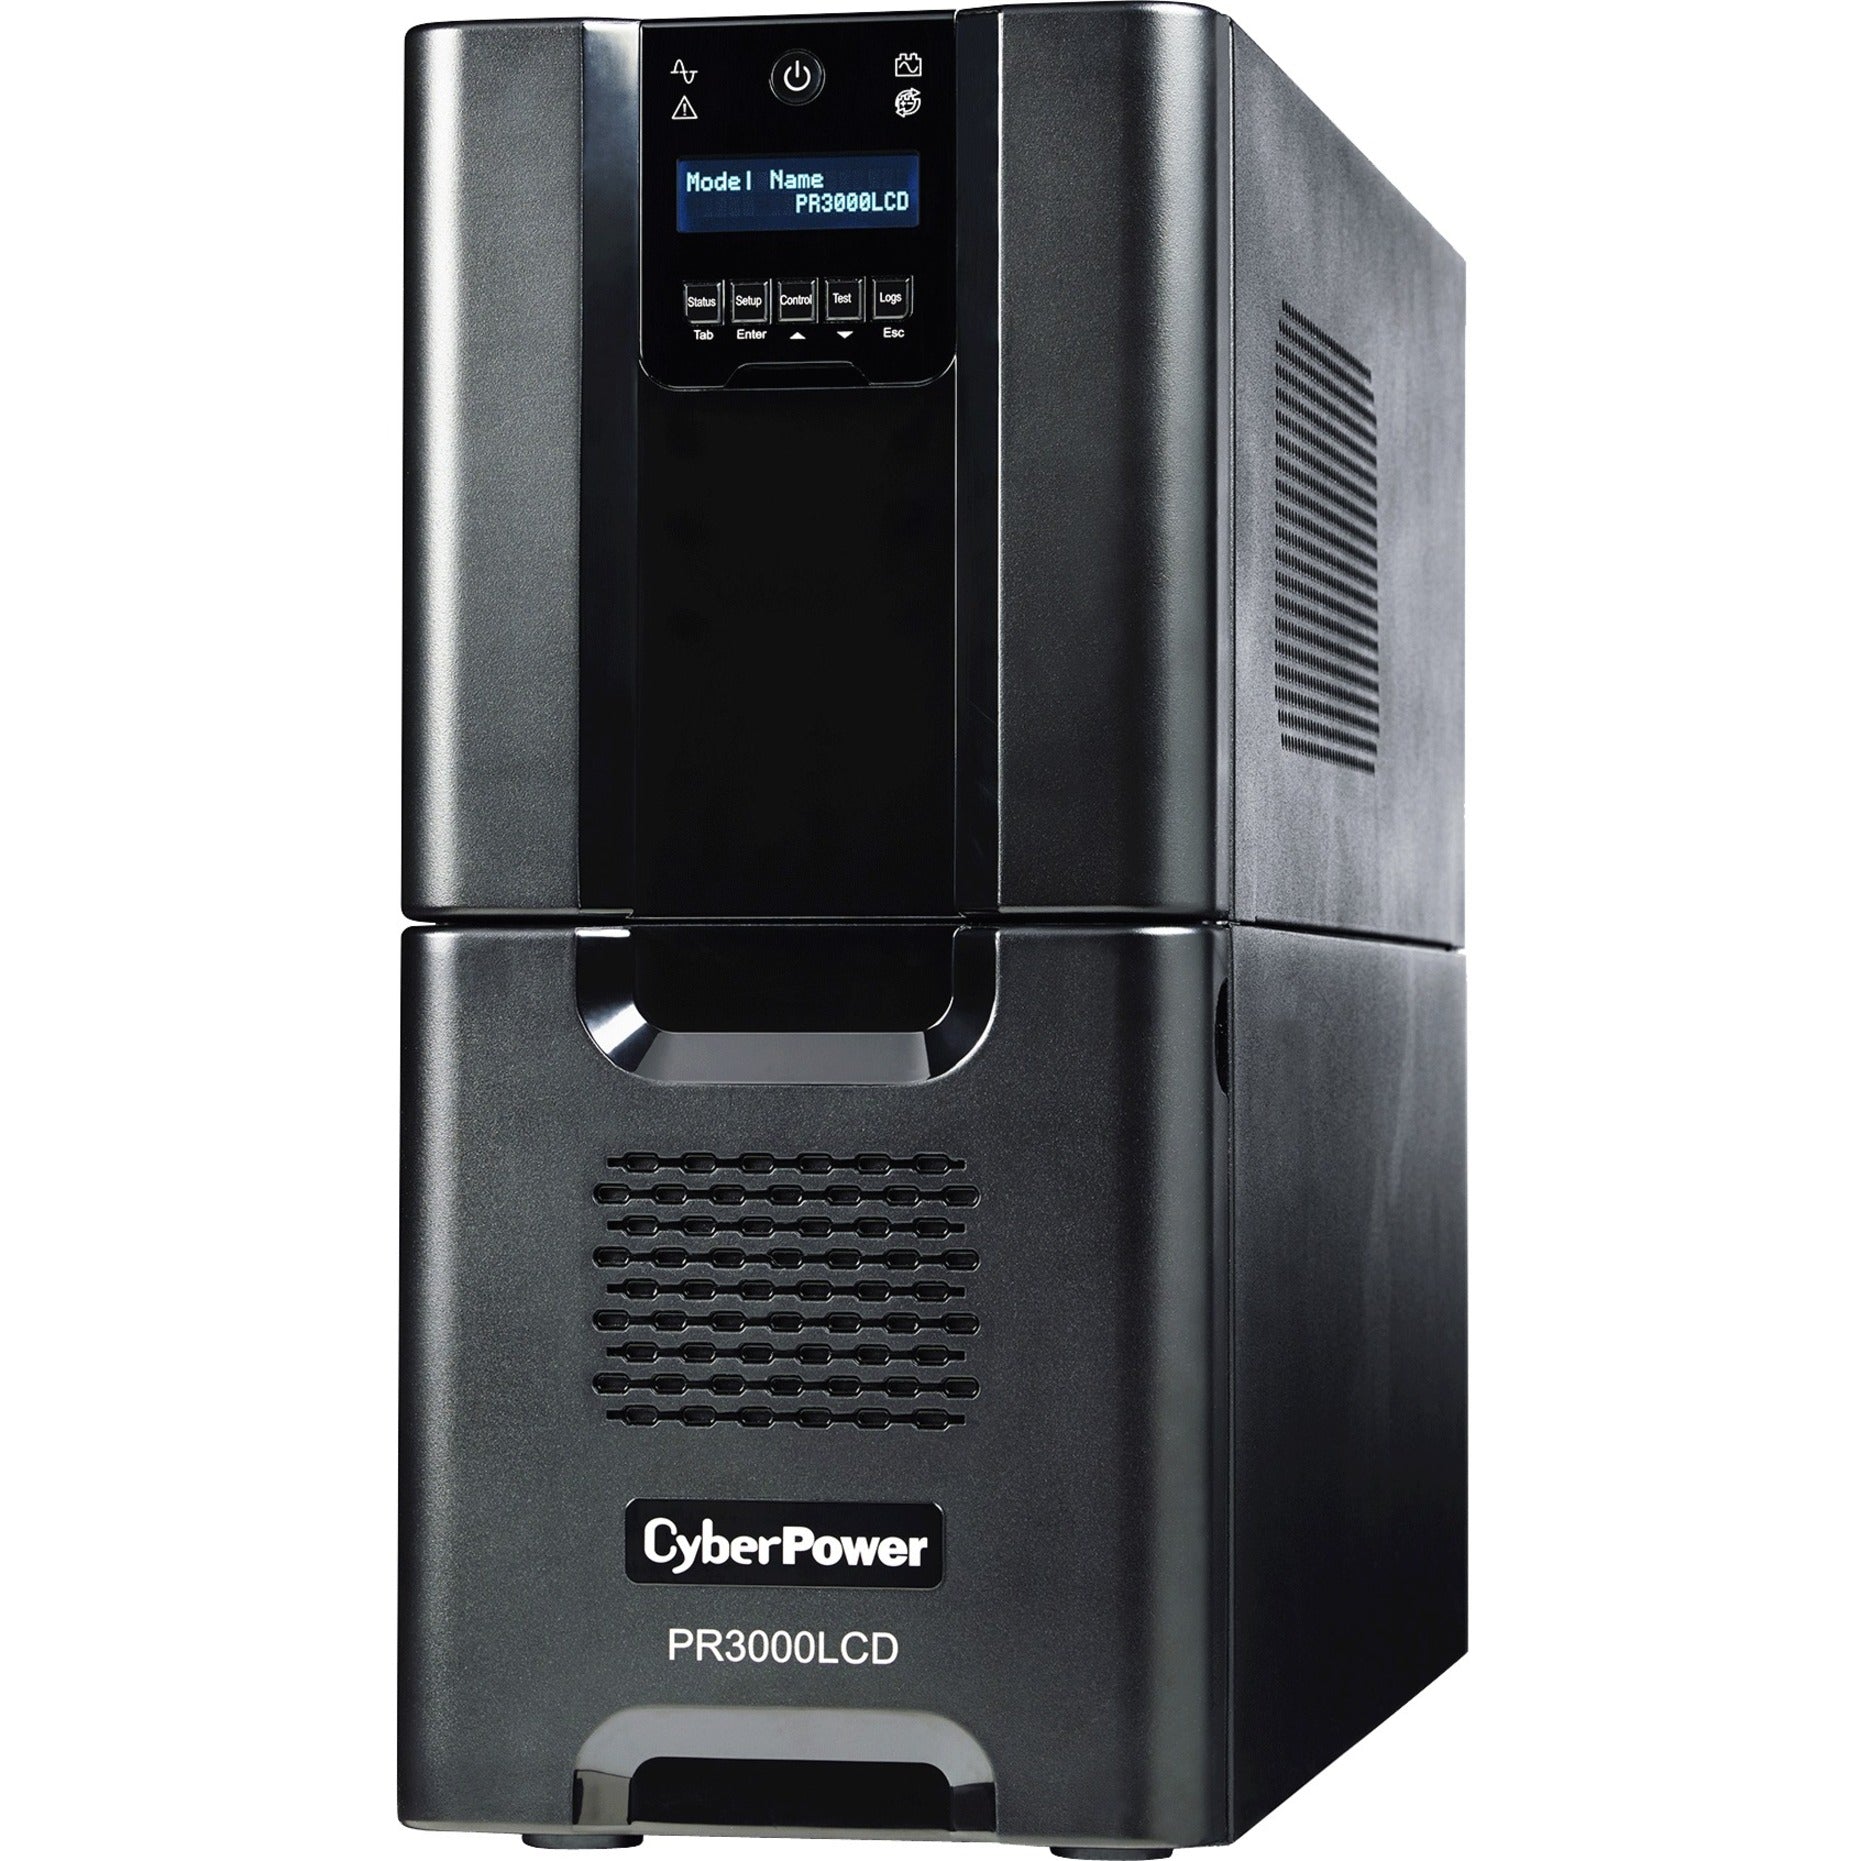 CyberPower PR3000LCD Smart App Sinewave UPS Systems, 3000VA Pure Sine Wave Tower LCD UPS